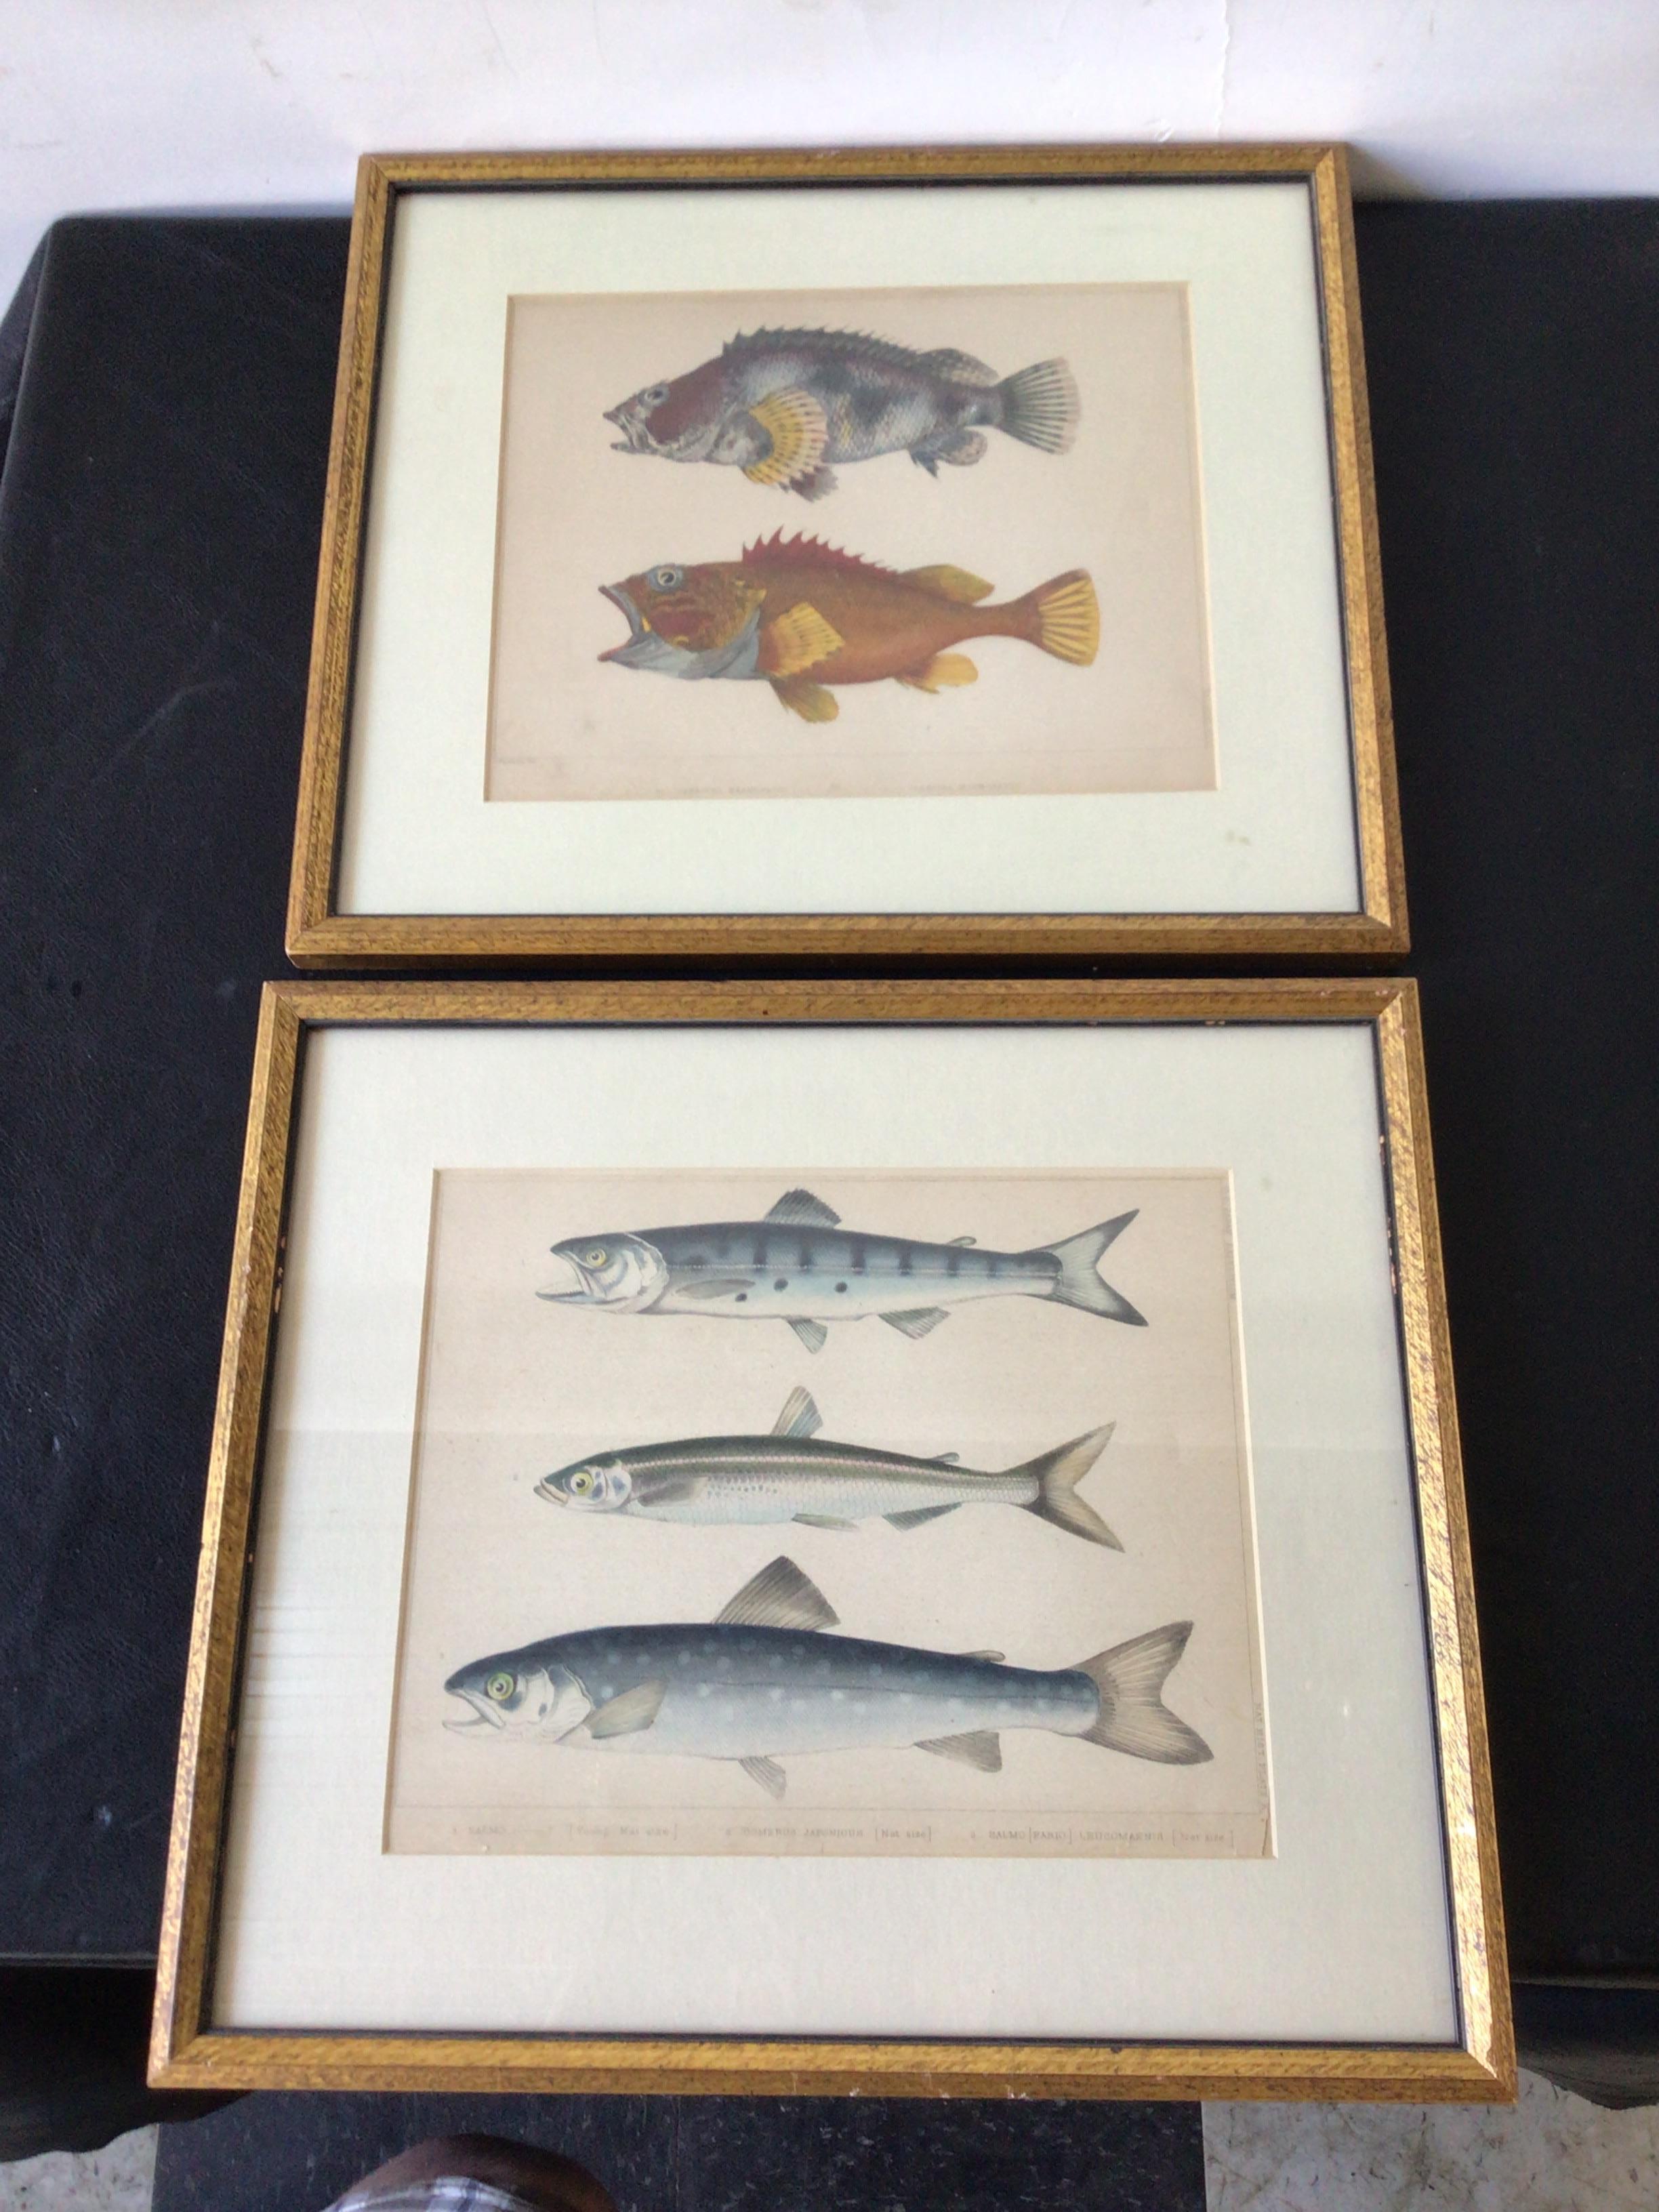 Pair of fish prints from the 1853 US Japan expedition.